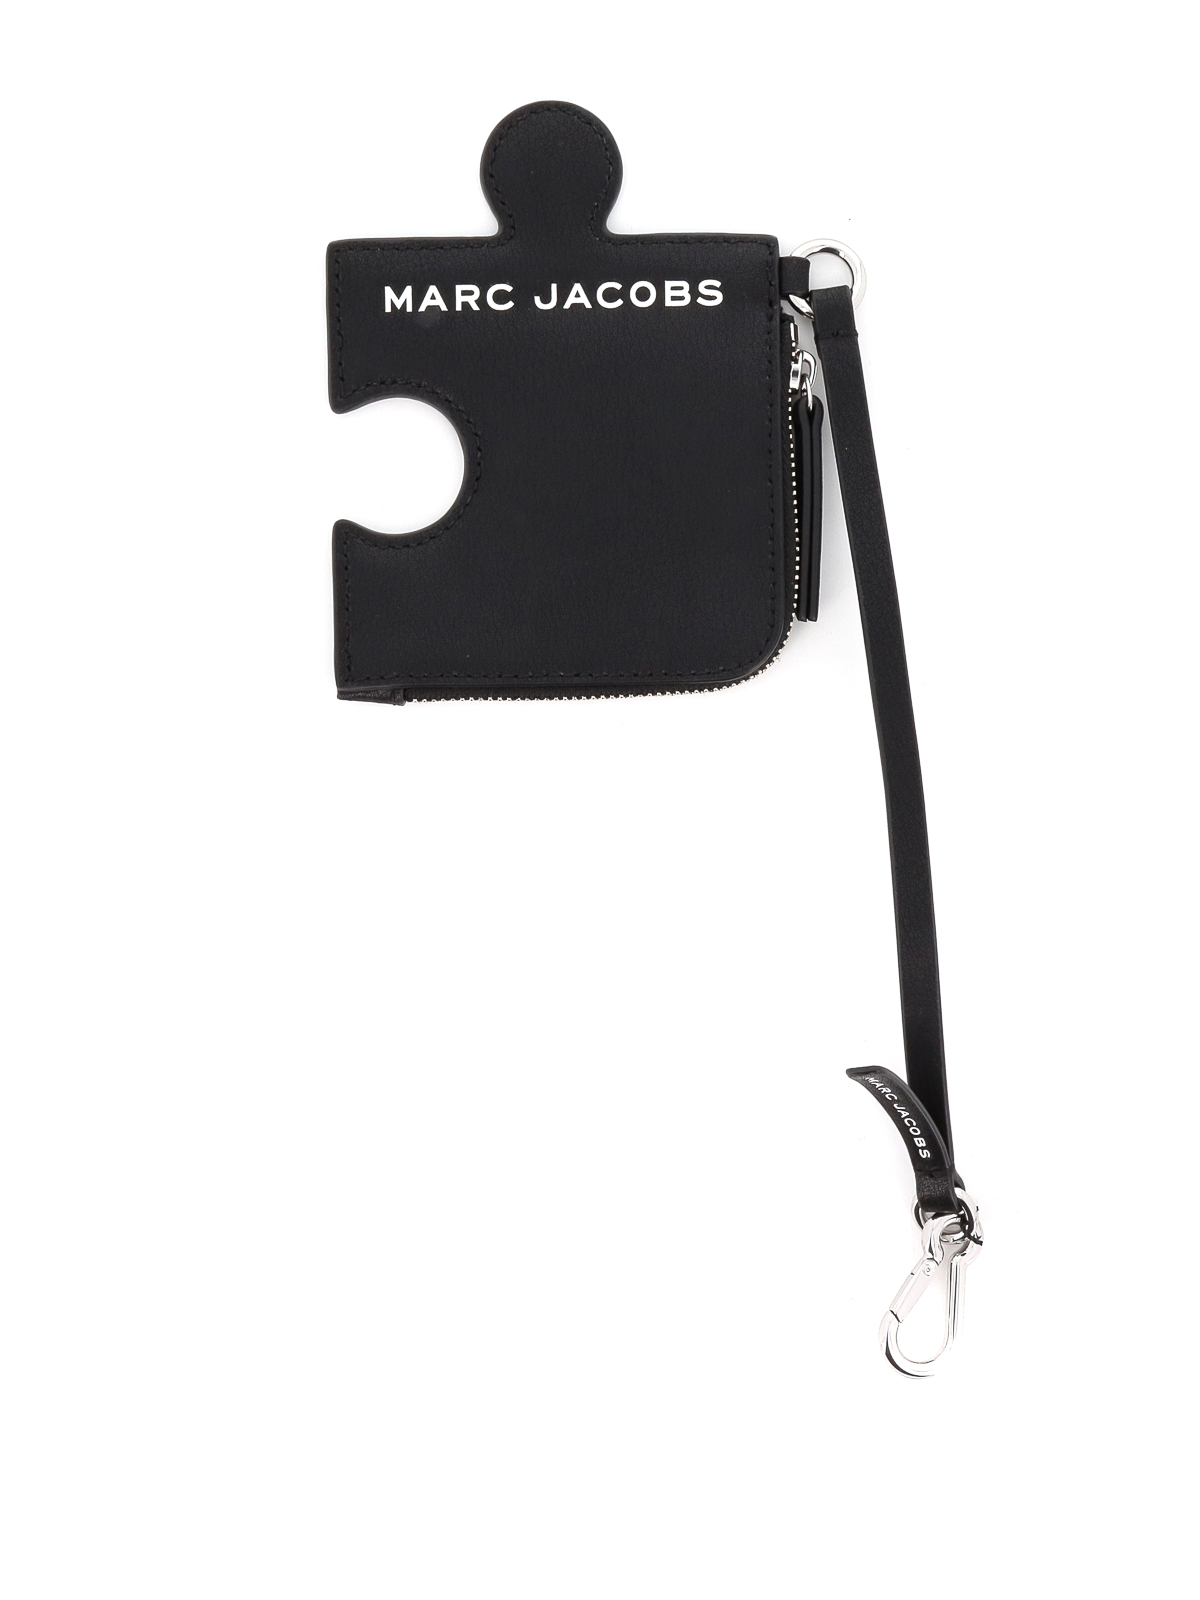 Marc Jacobs The Jigsaw Puzzle Purse In Black